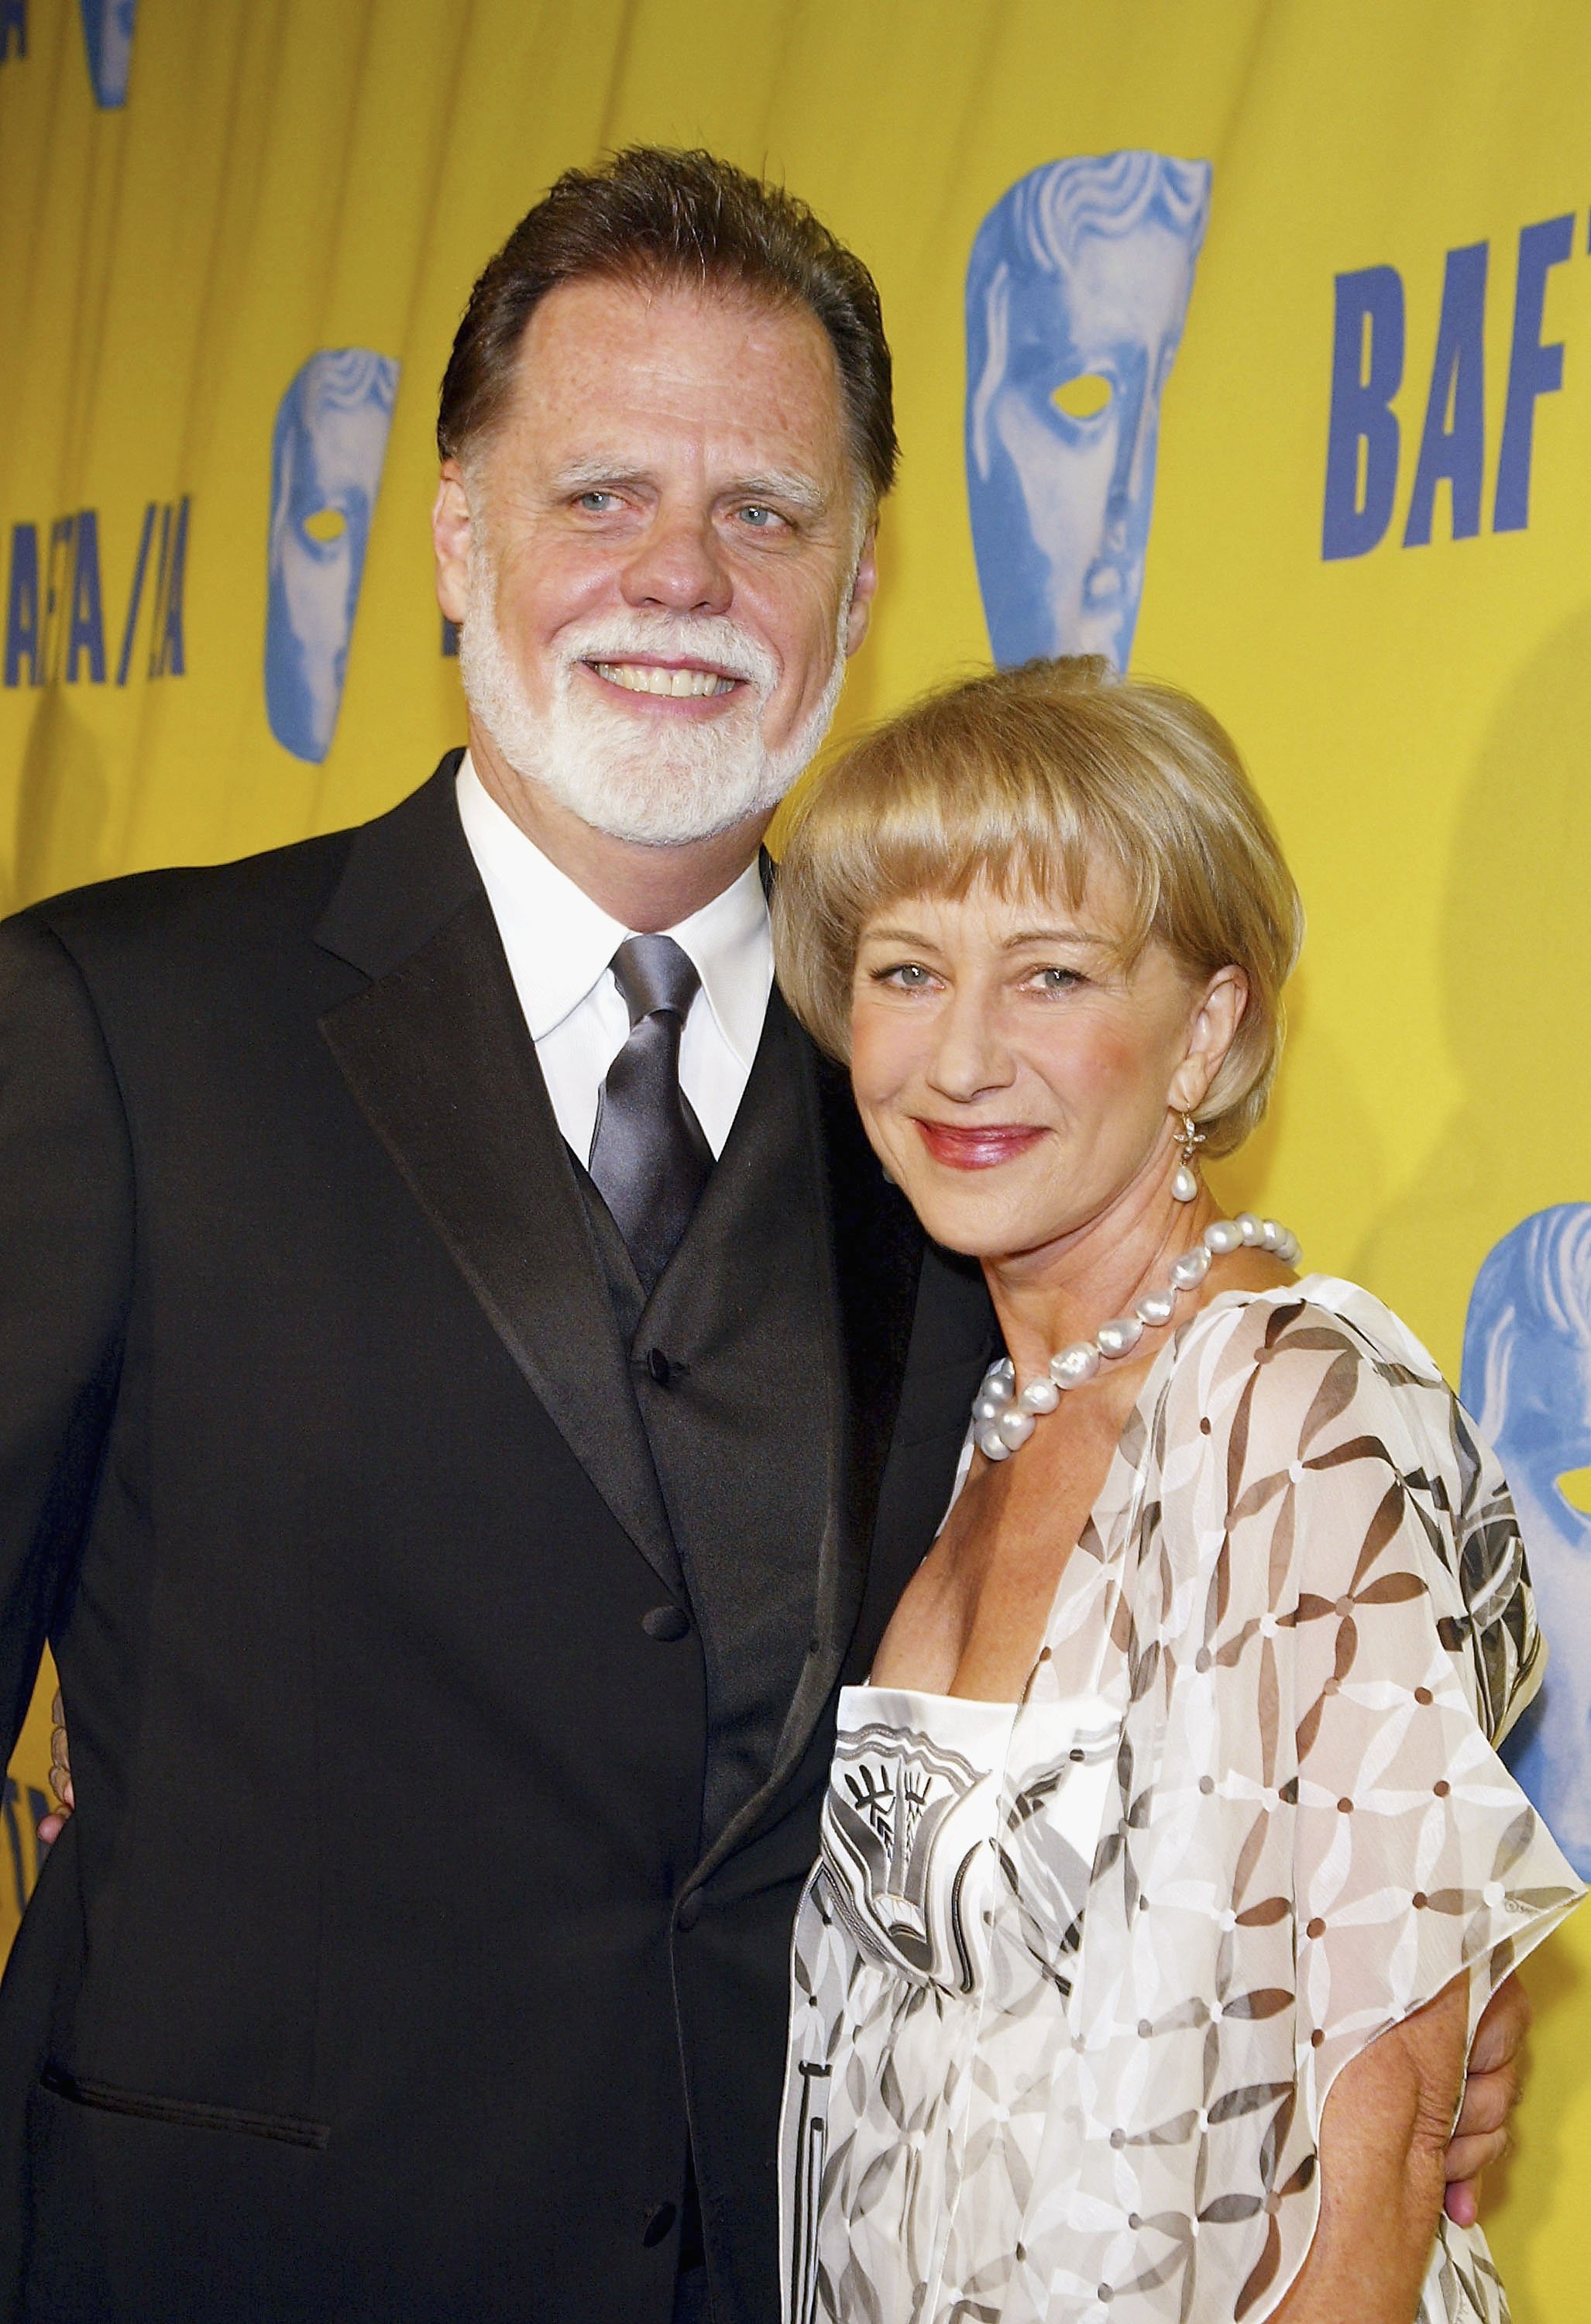 Taylor Hackford and Helen Mirren at the 13th Annual BAFTA/LA Britannia Awards on November 4, 2004, in Beverly Hills, California. | Source: Kevin Winter/Getty Images